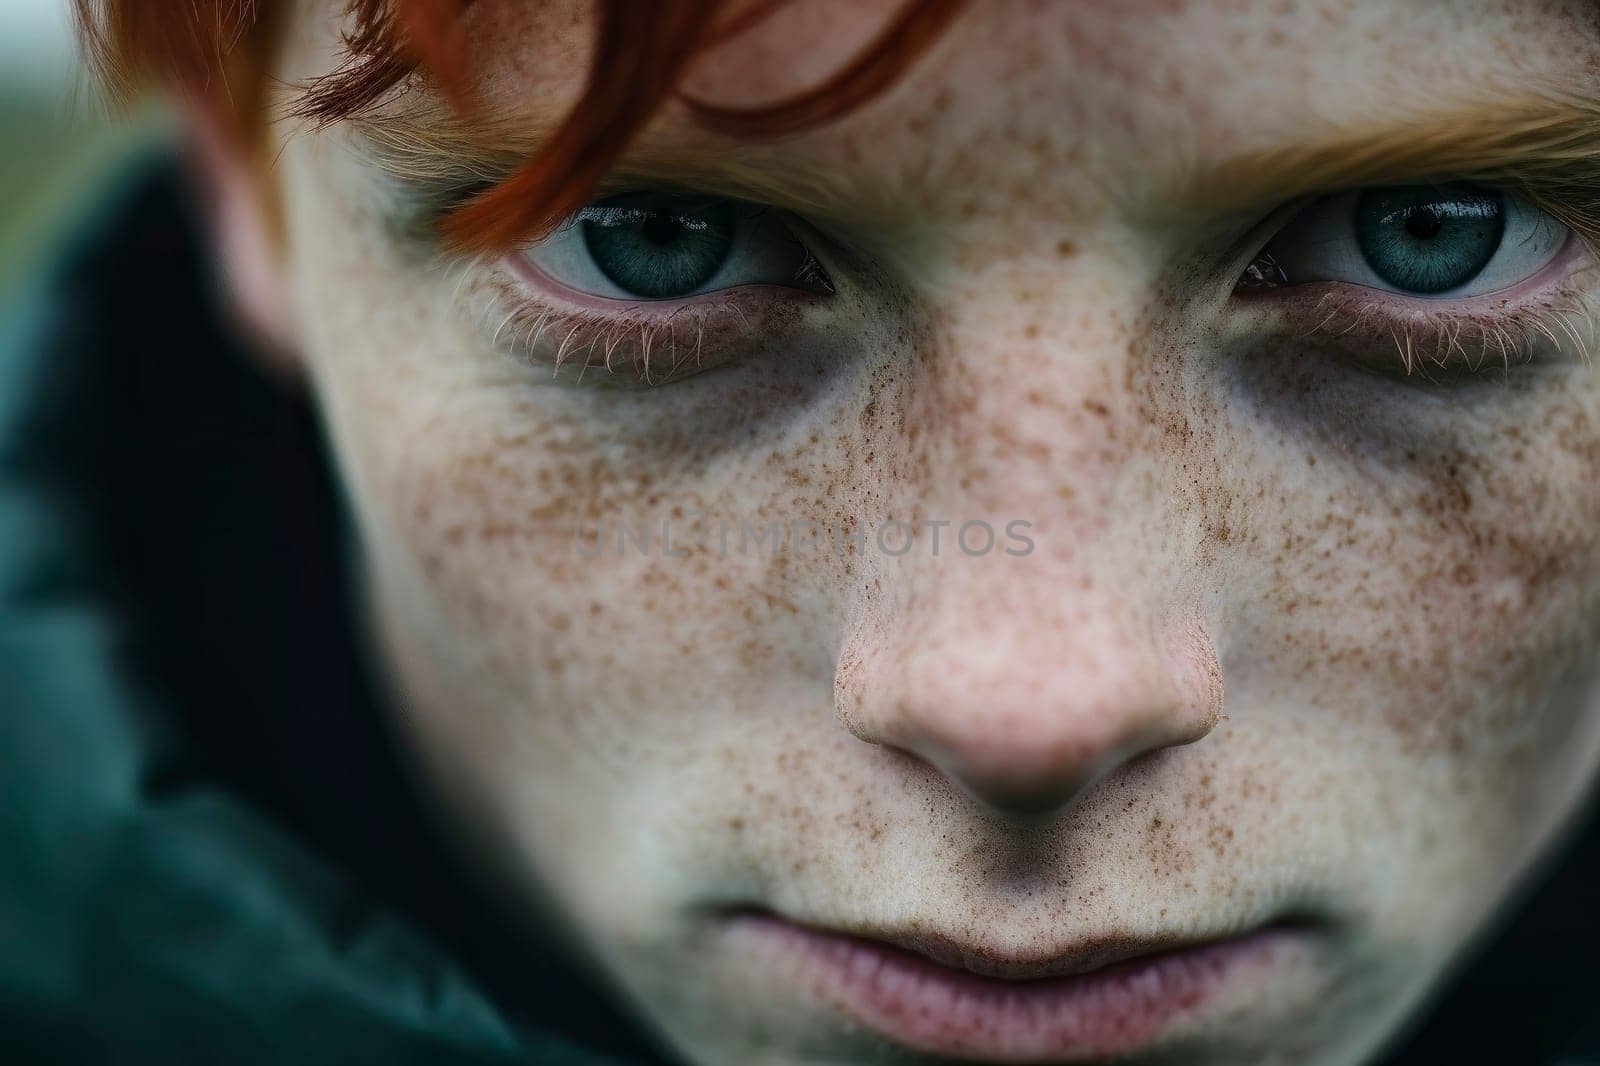 This captivating photo captures the defiant gaze of a young boy, filled with anger and determination